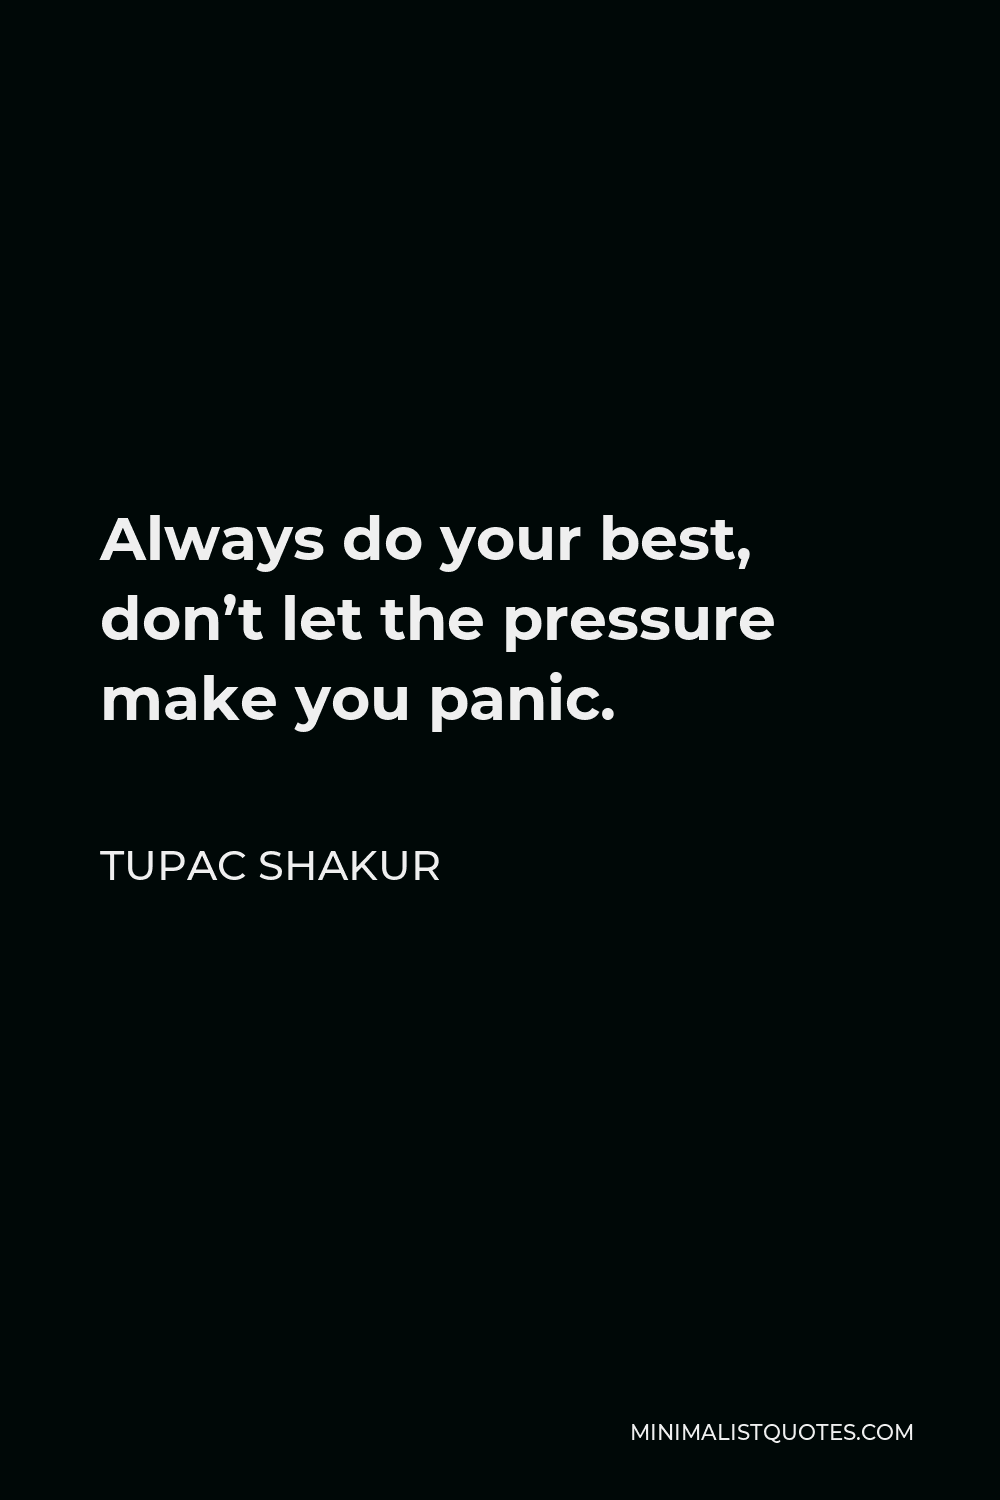 Tupac Shakur Quote: Always do your best, don't let the pressure make you  panic.